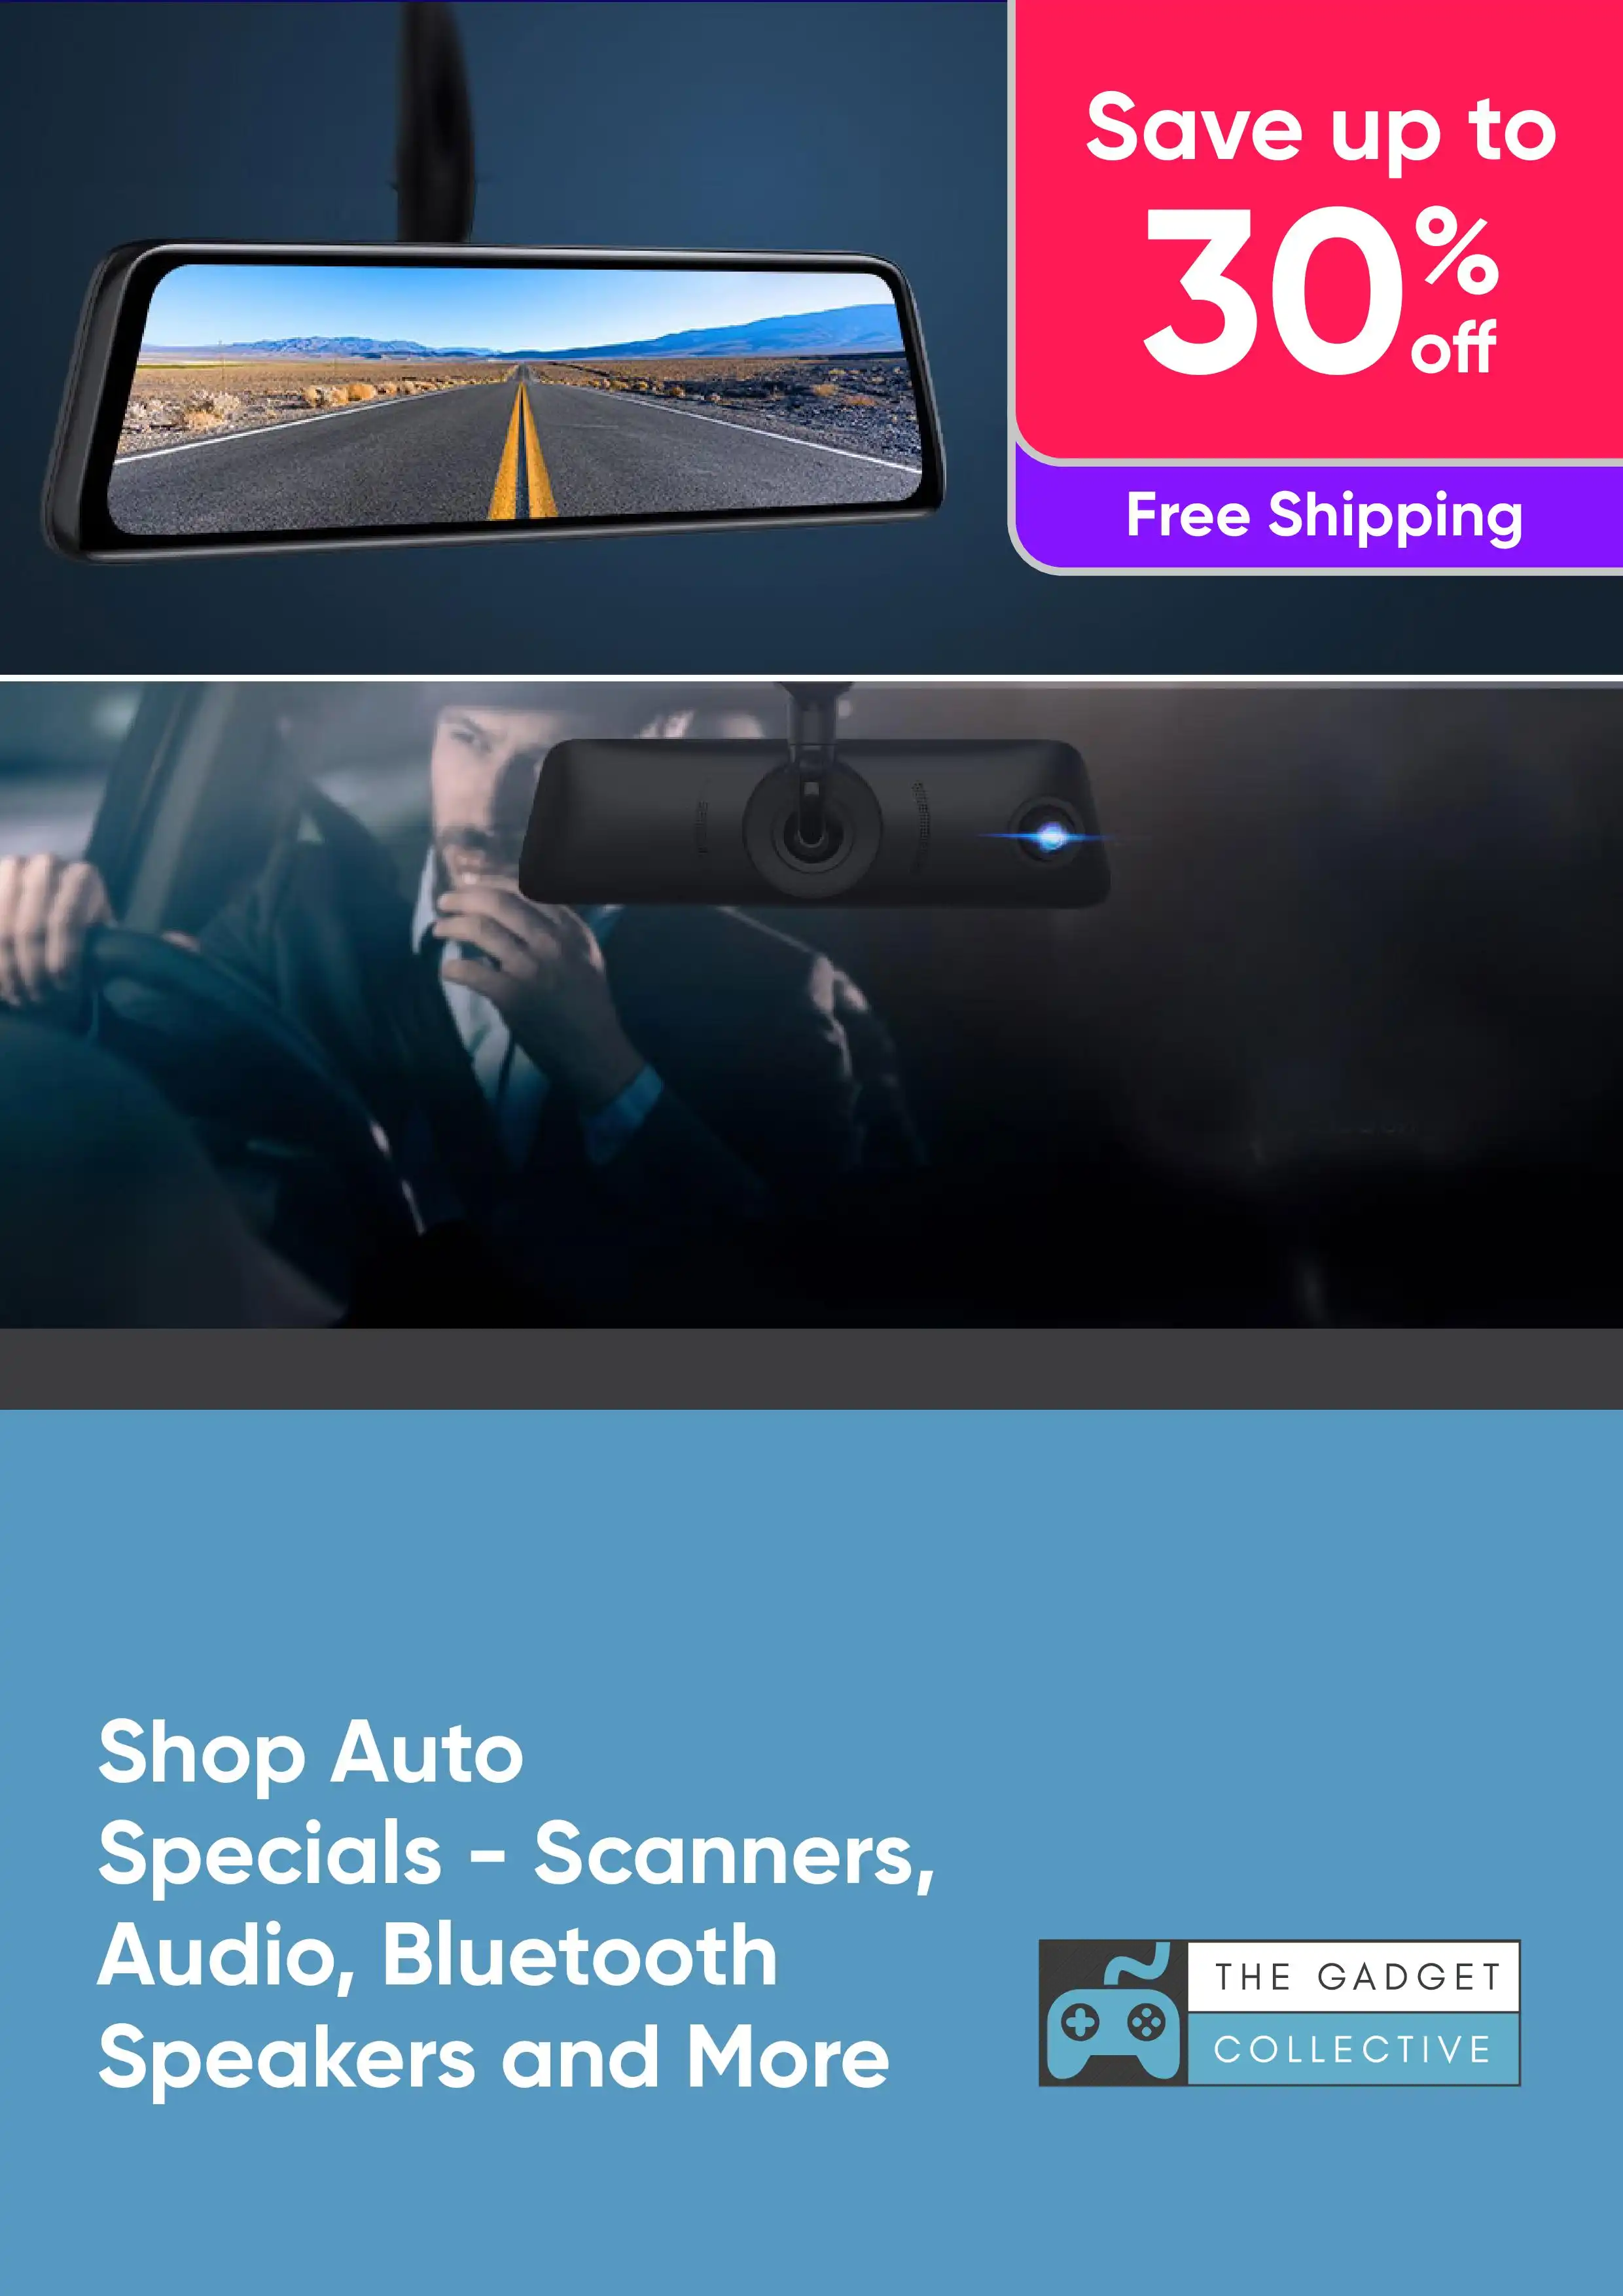 Shop Auto Specials Up to 30% Off RRP - Save On Scanners, Audio